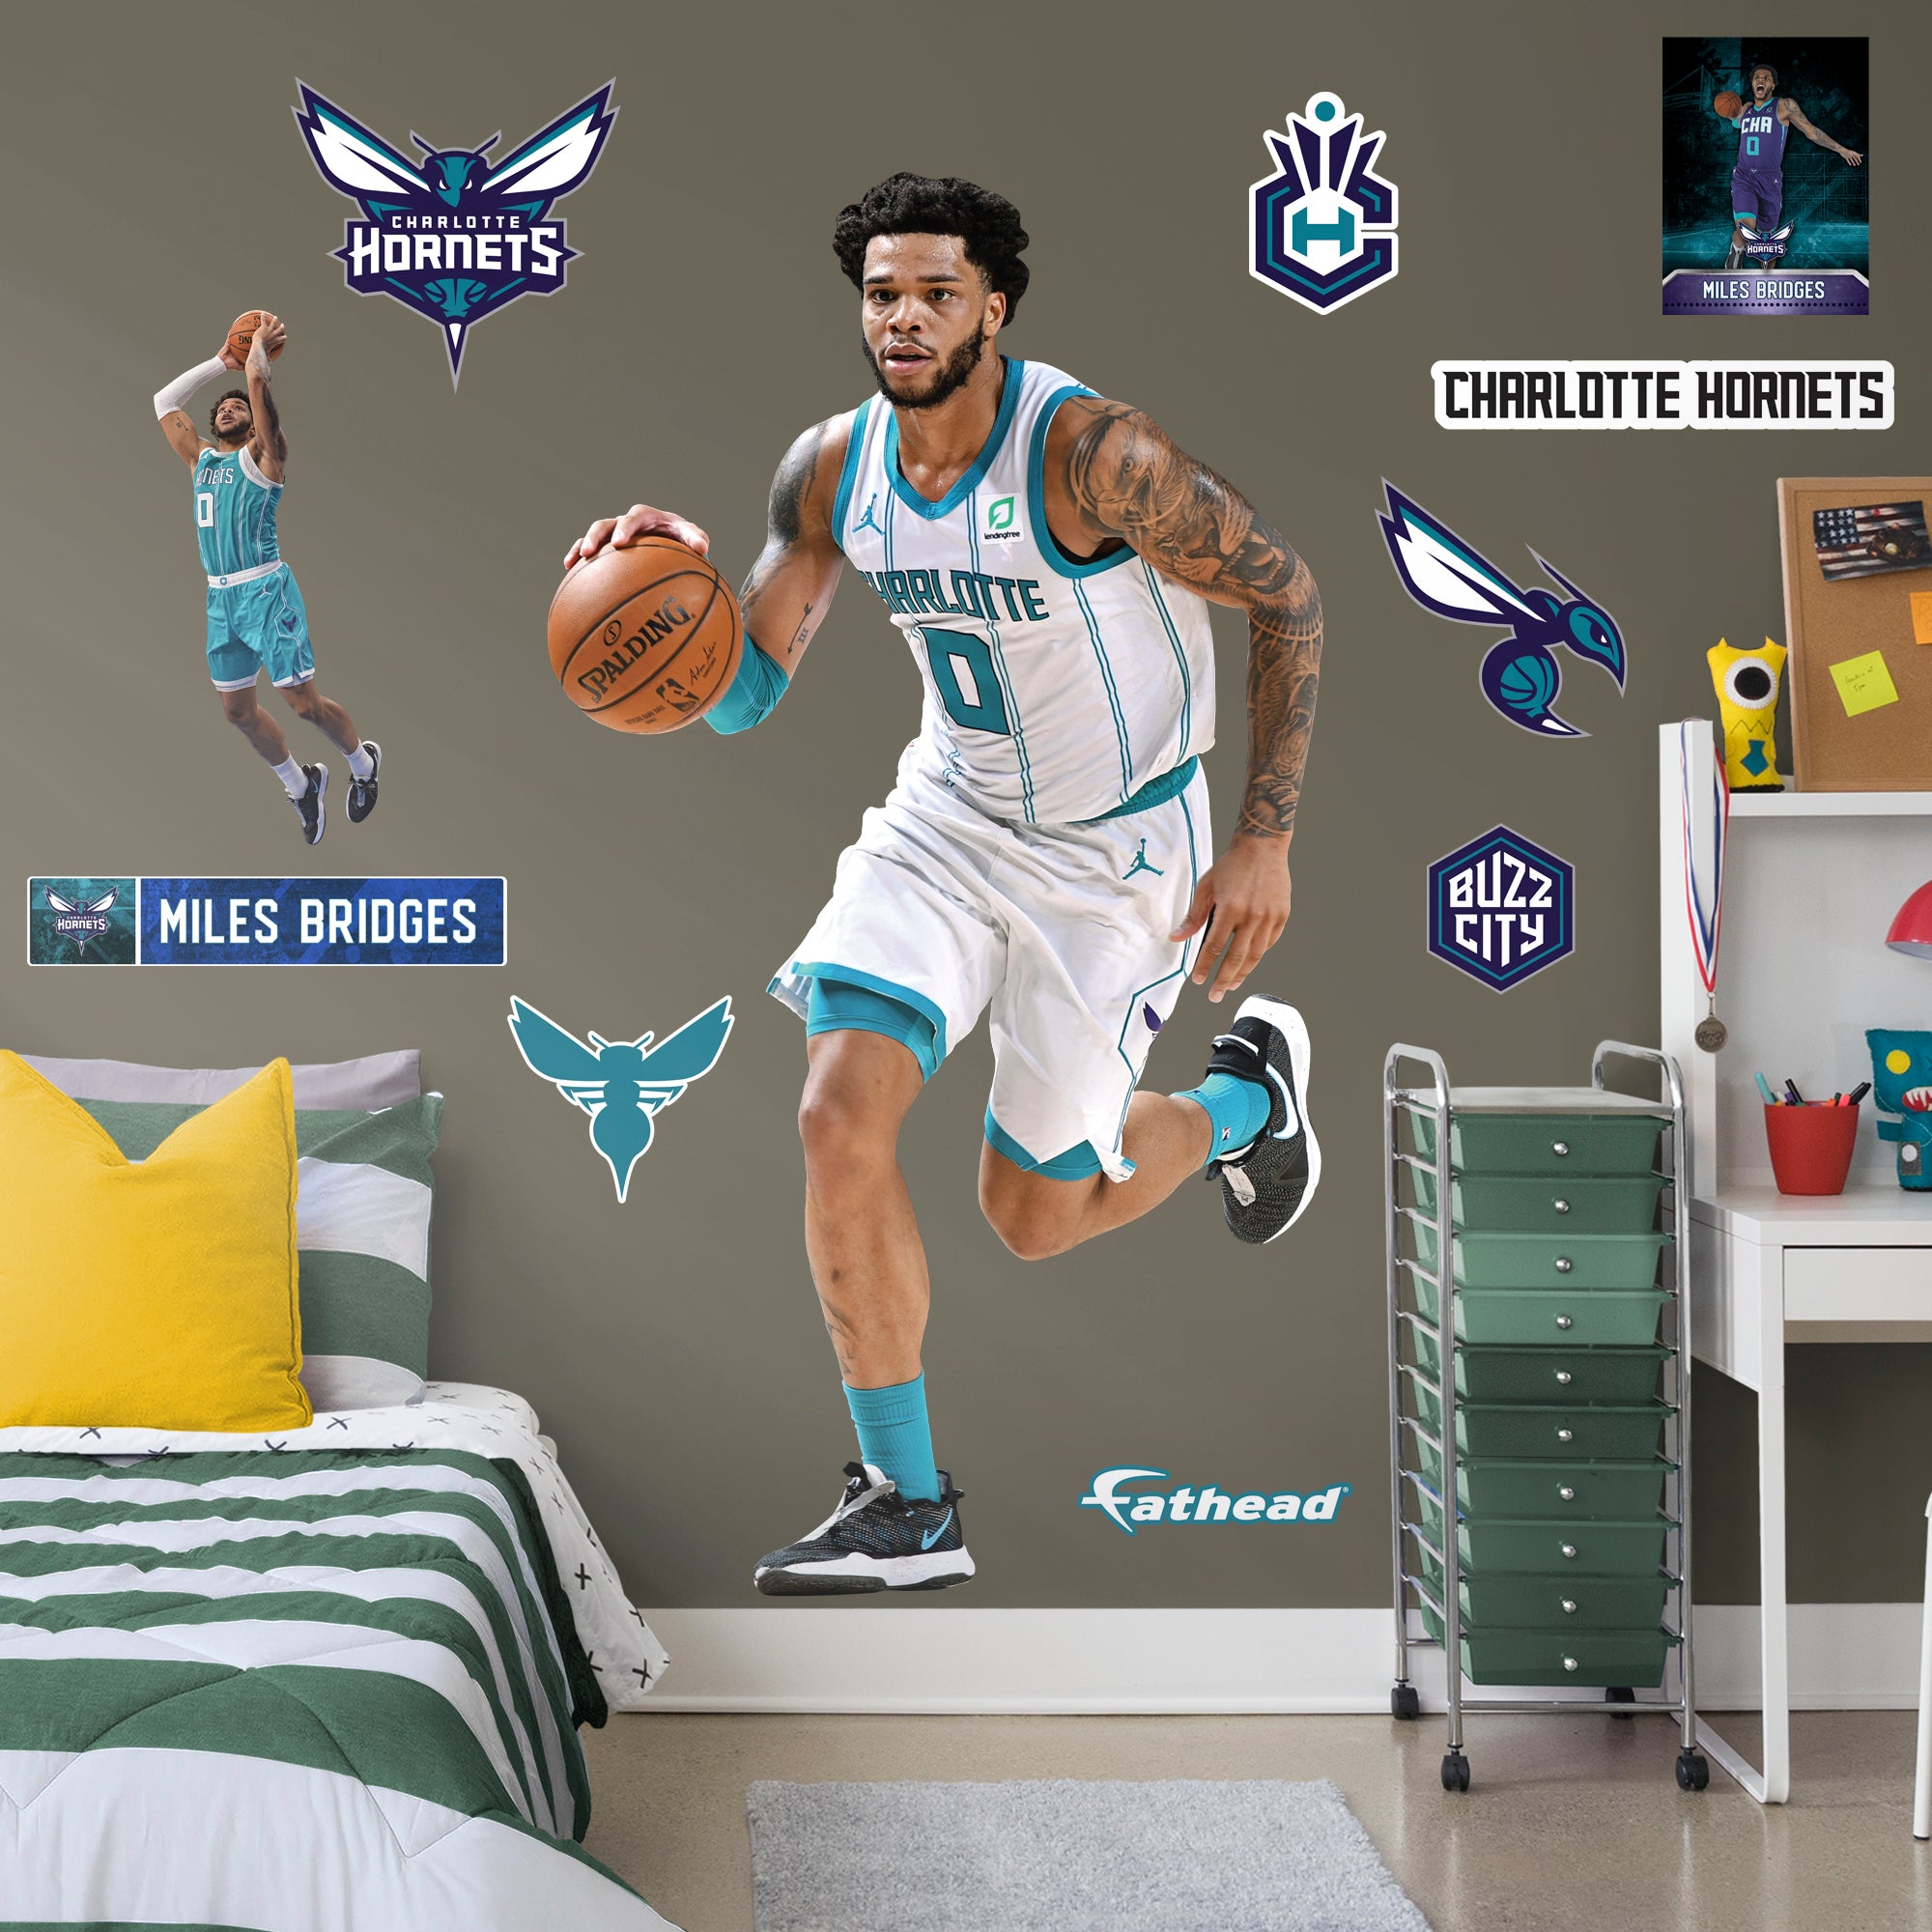 Miles Bridges 2021 for Charlotte Hornets - Officially Licensed NBA Removable Wall Decal Life-Size Athlete + 10 Decals (78"W x 42